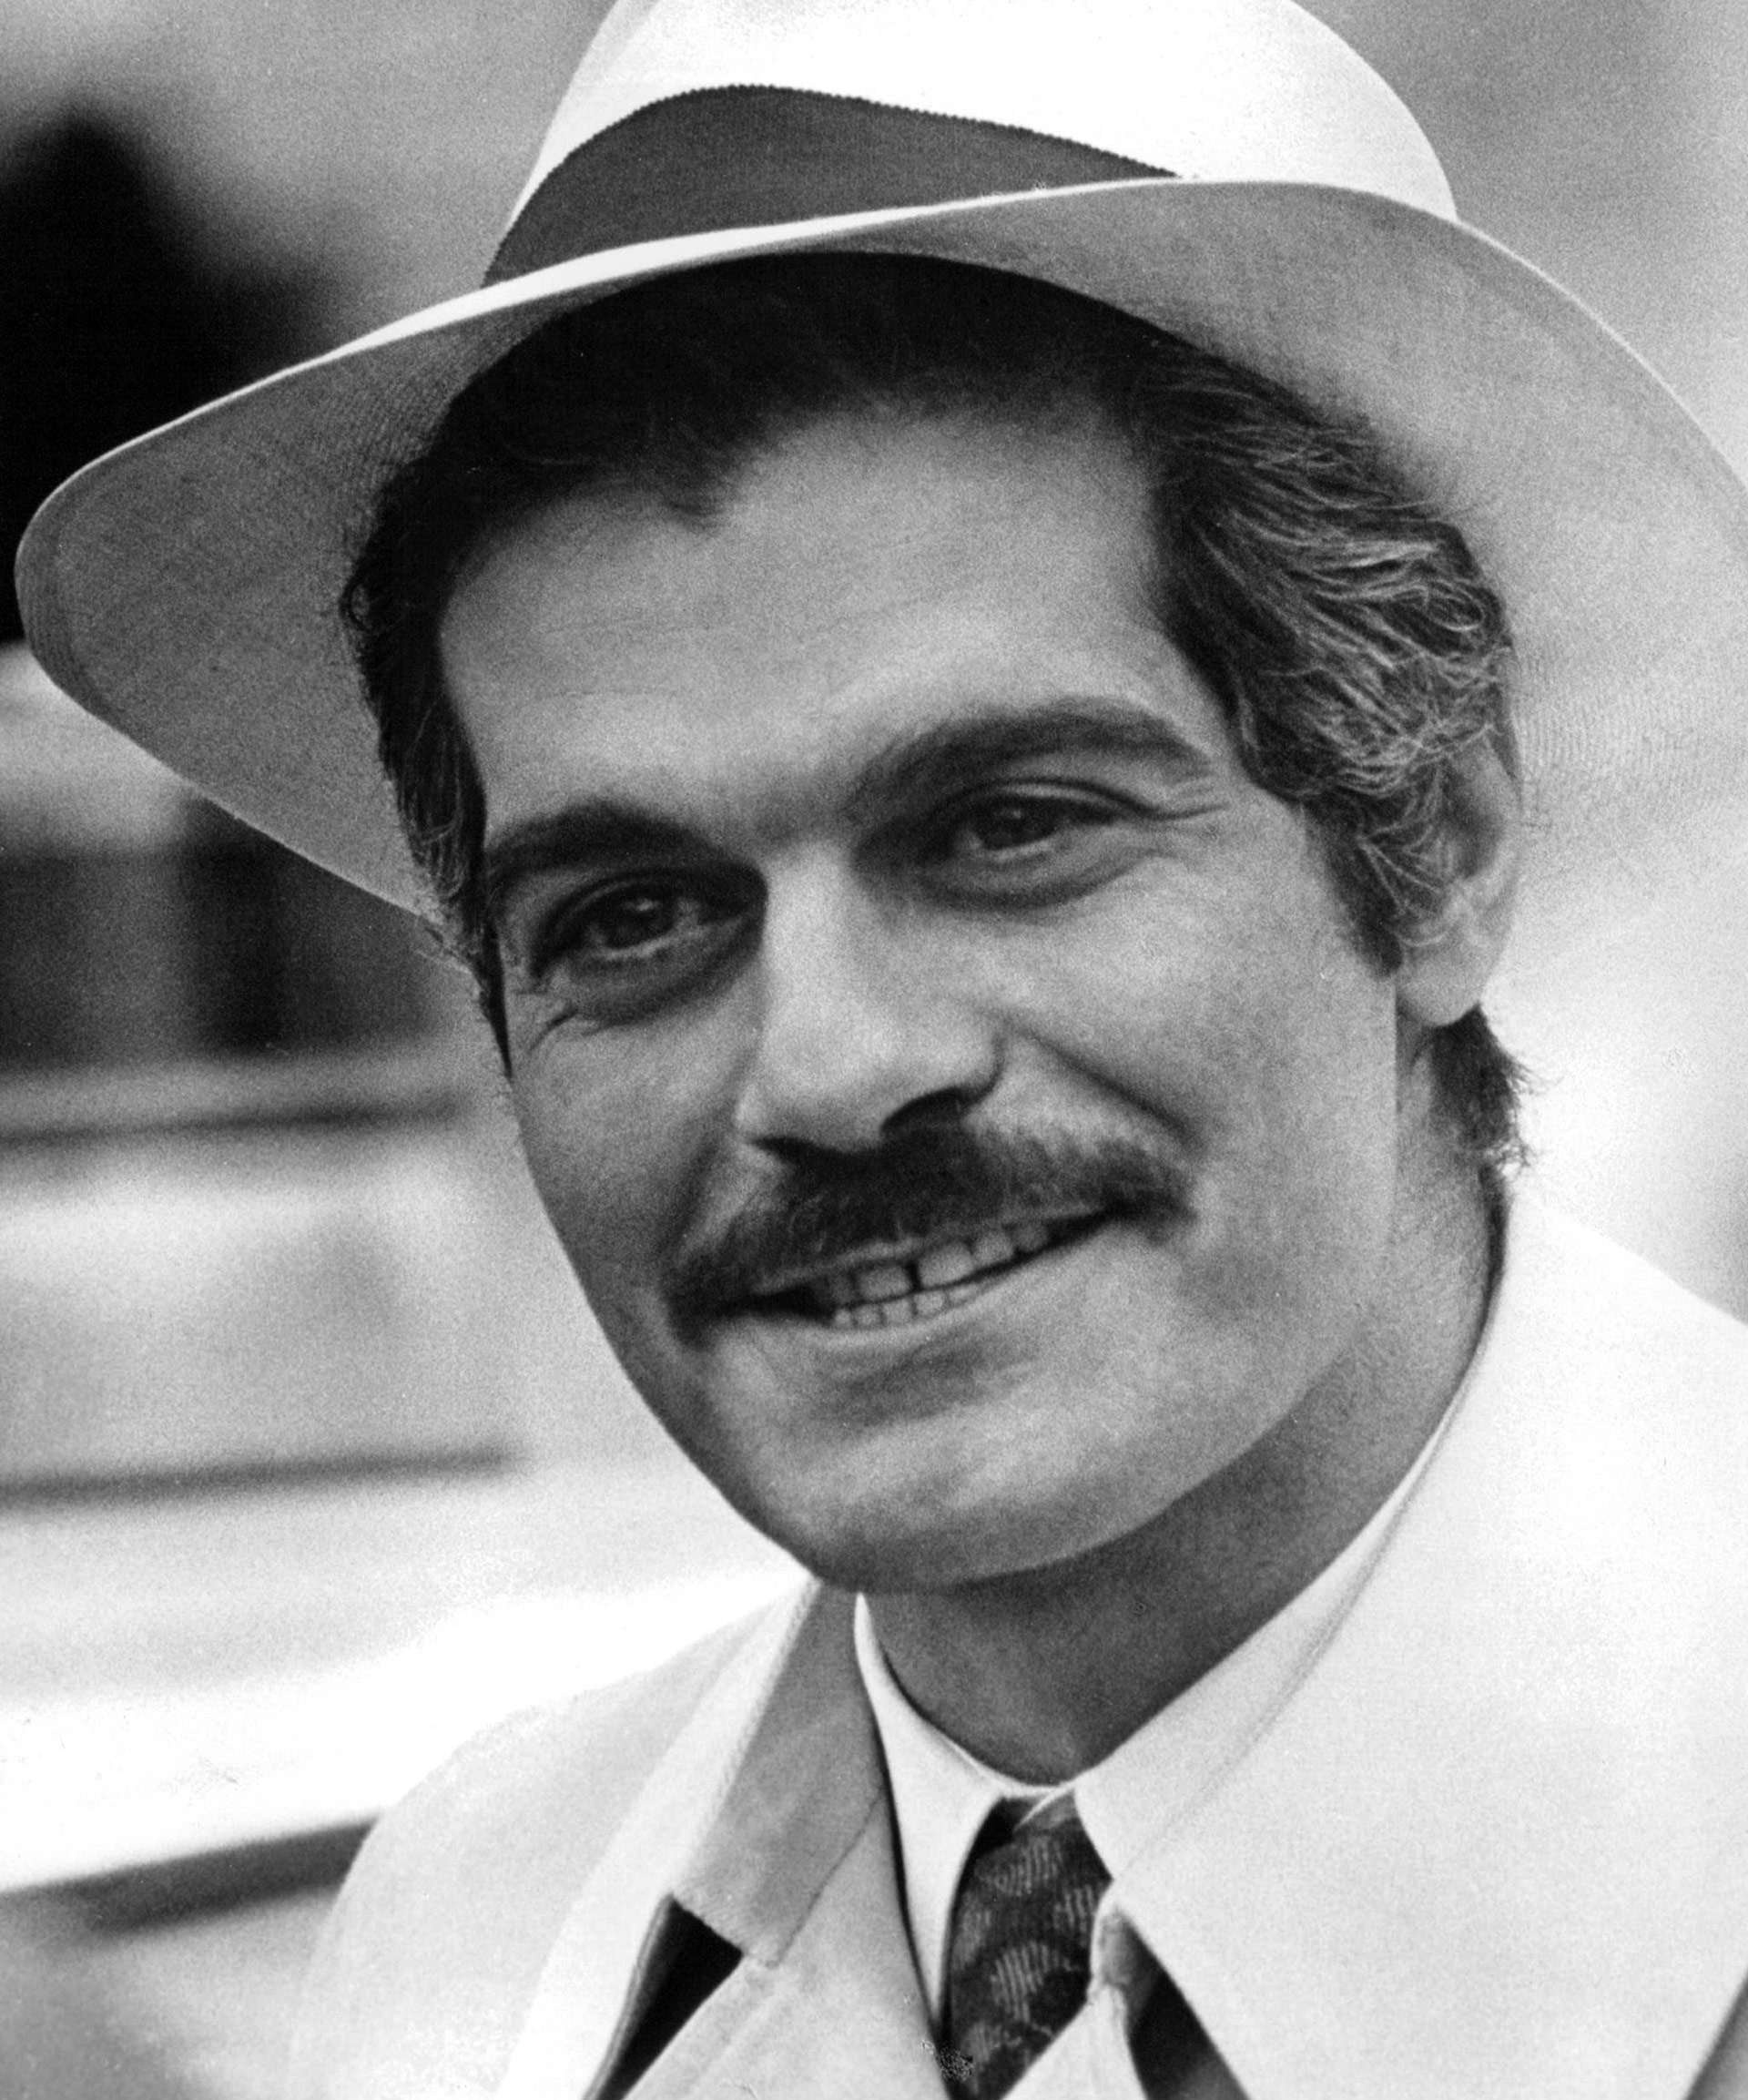 ... of the word 'omar sharif'and use them for your website, blog, etc.